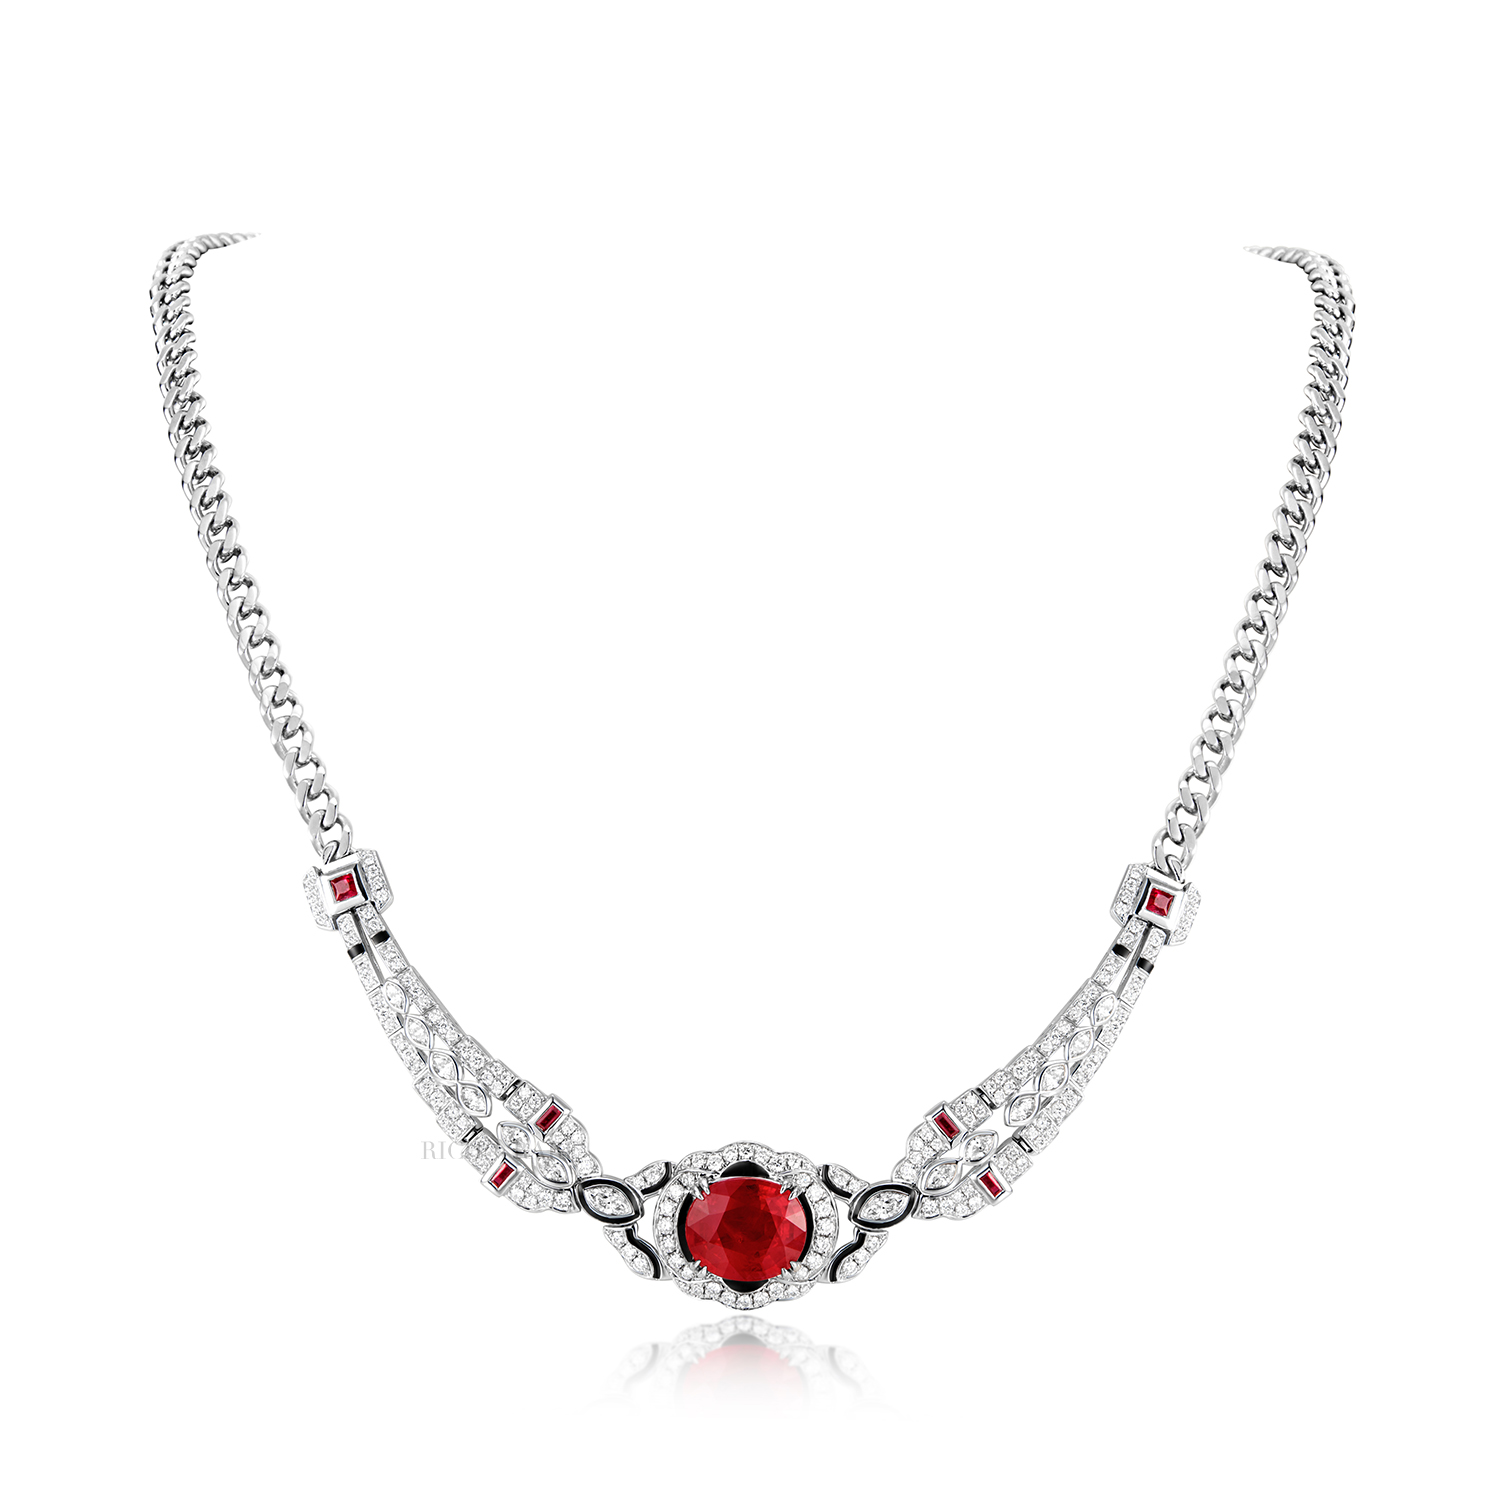 RUBY, ENAMEL AND DIAMOND NECKLACE